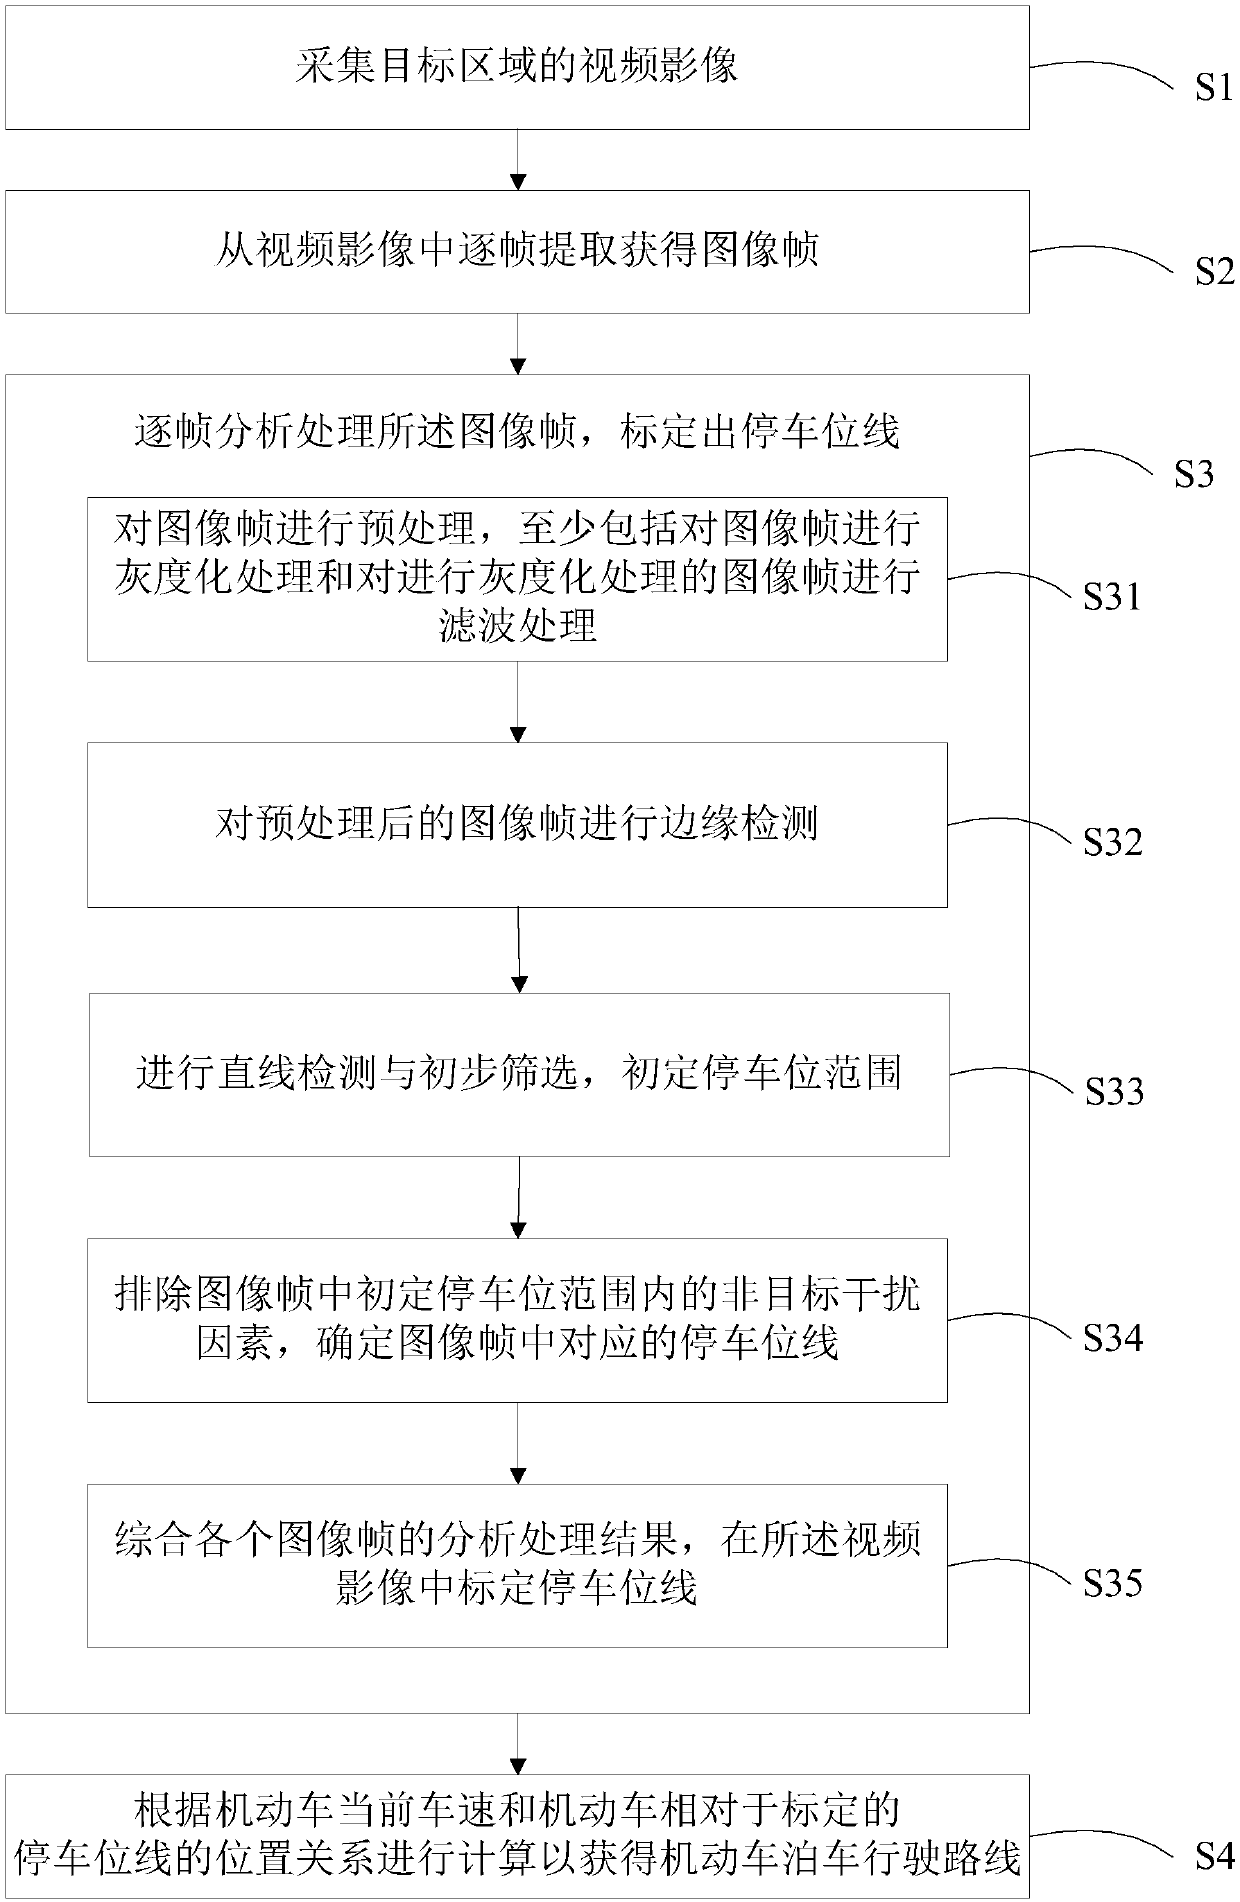 Automatic parking assistant method and system based on image vision